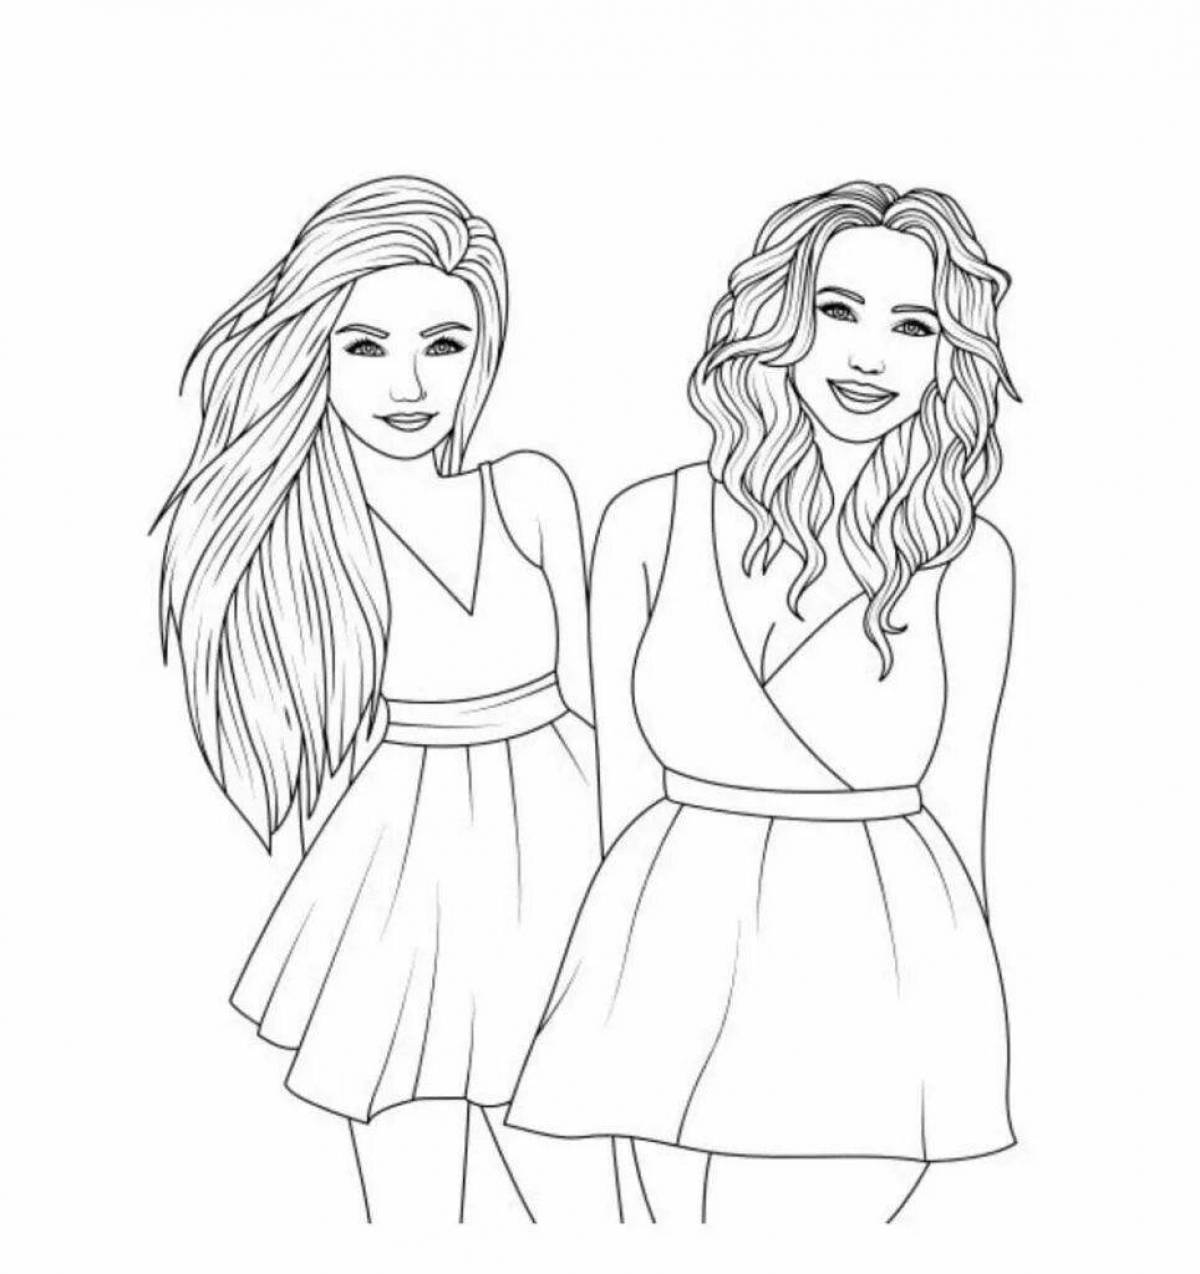 Coloring page nice girlfriends